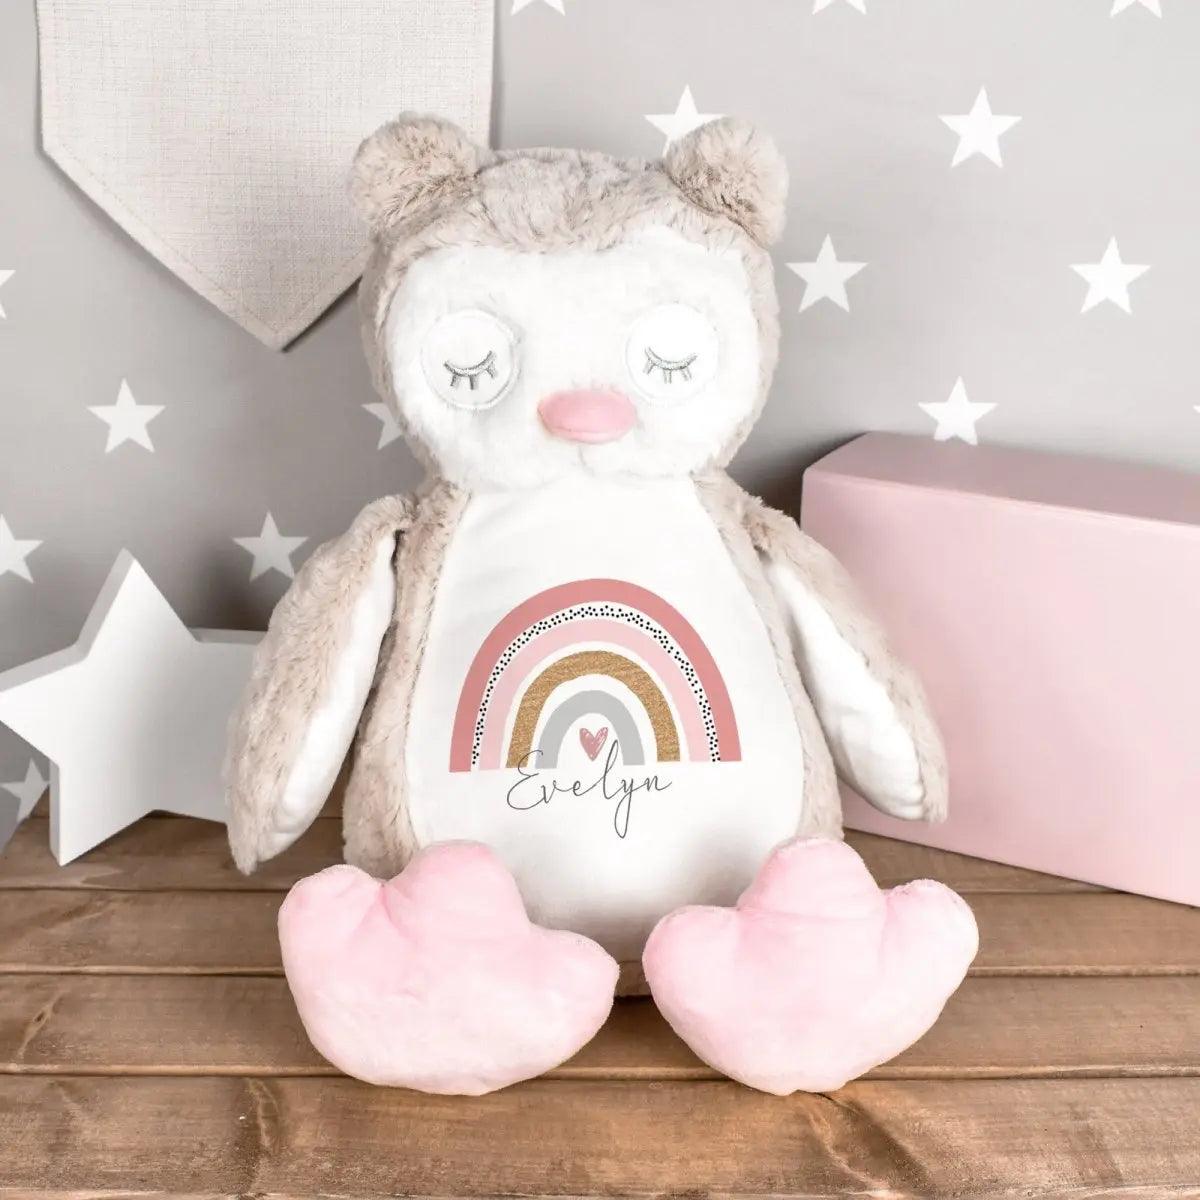 Personalised Owl Teddy, Personalised Plush Toy, Baby Girl Gift, Custom Soft Toy, Pink Rainbow Teddy, Teddy Nursery Decor, New Arrival Gift - Amy Lucy